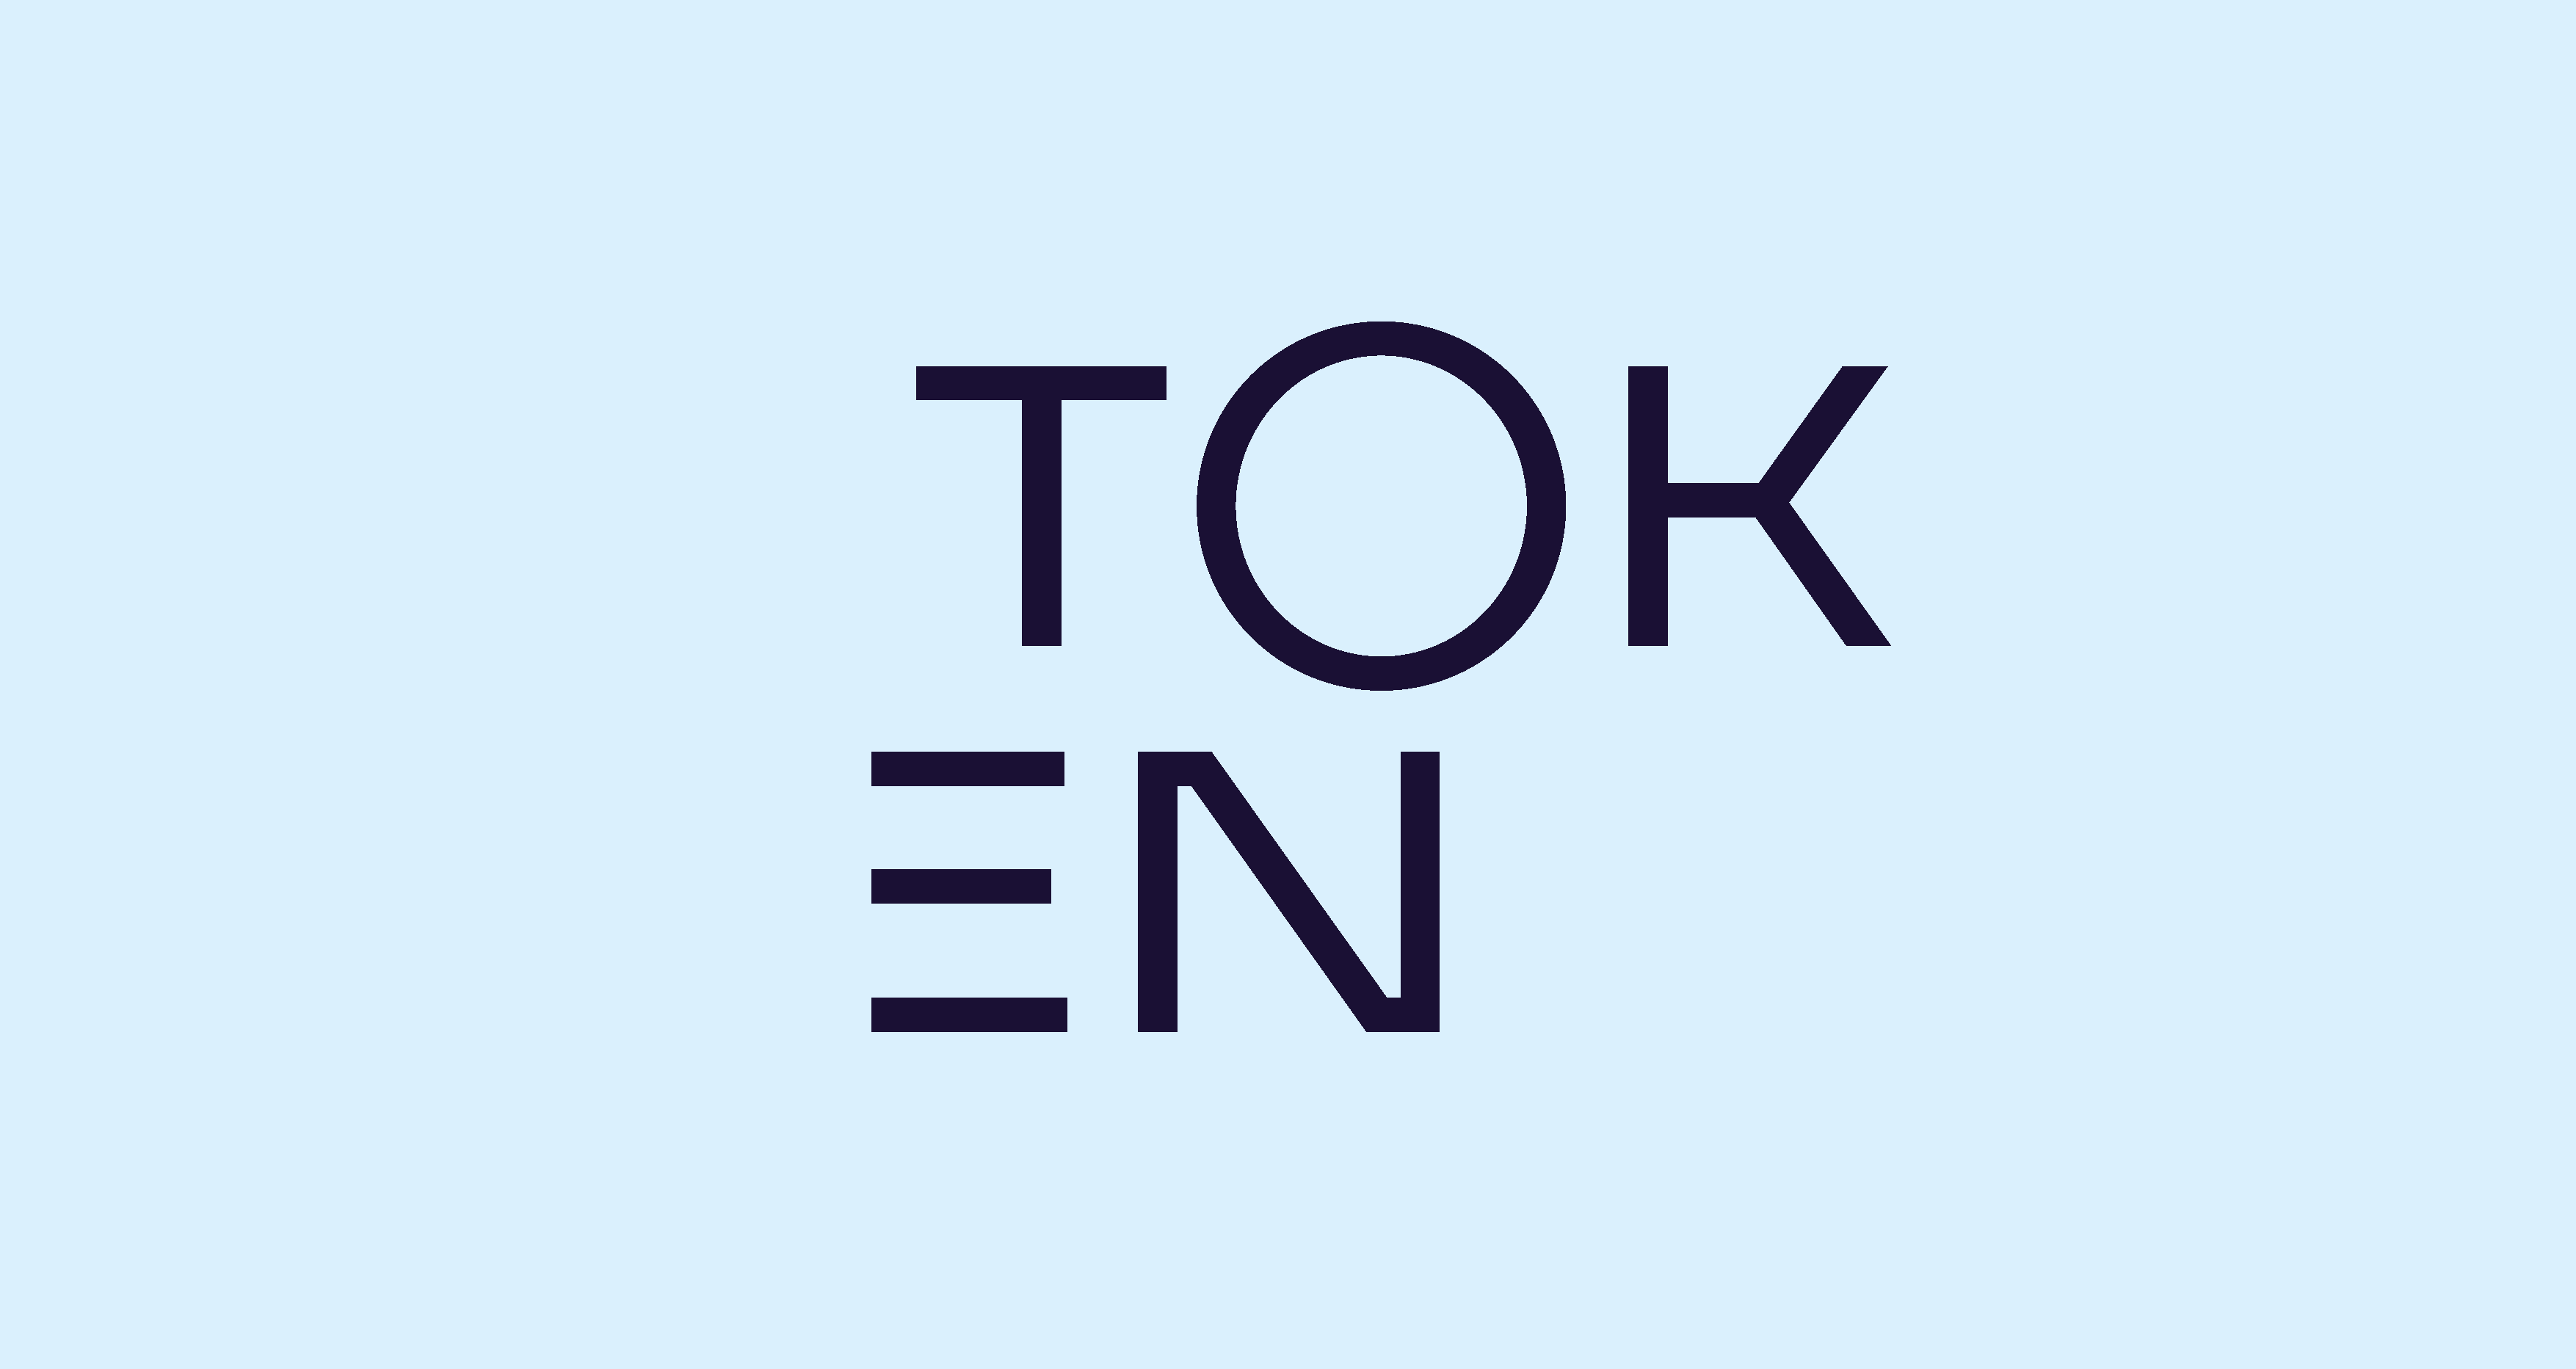 Open Payments Growth: Token’s Channel-focused Strategy Driving Market Expansion